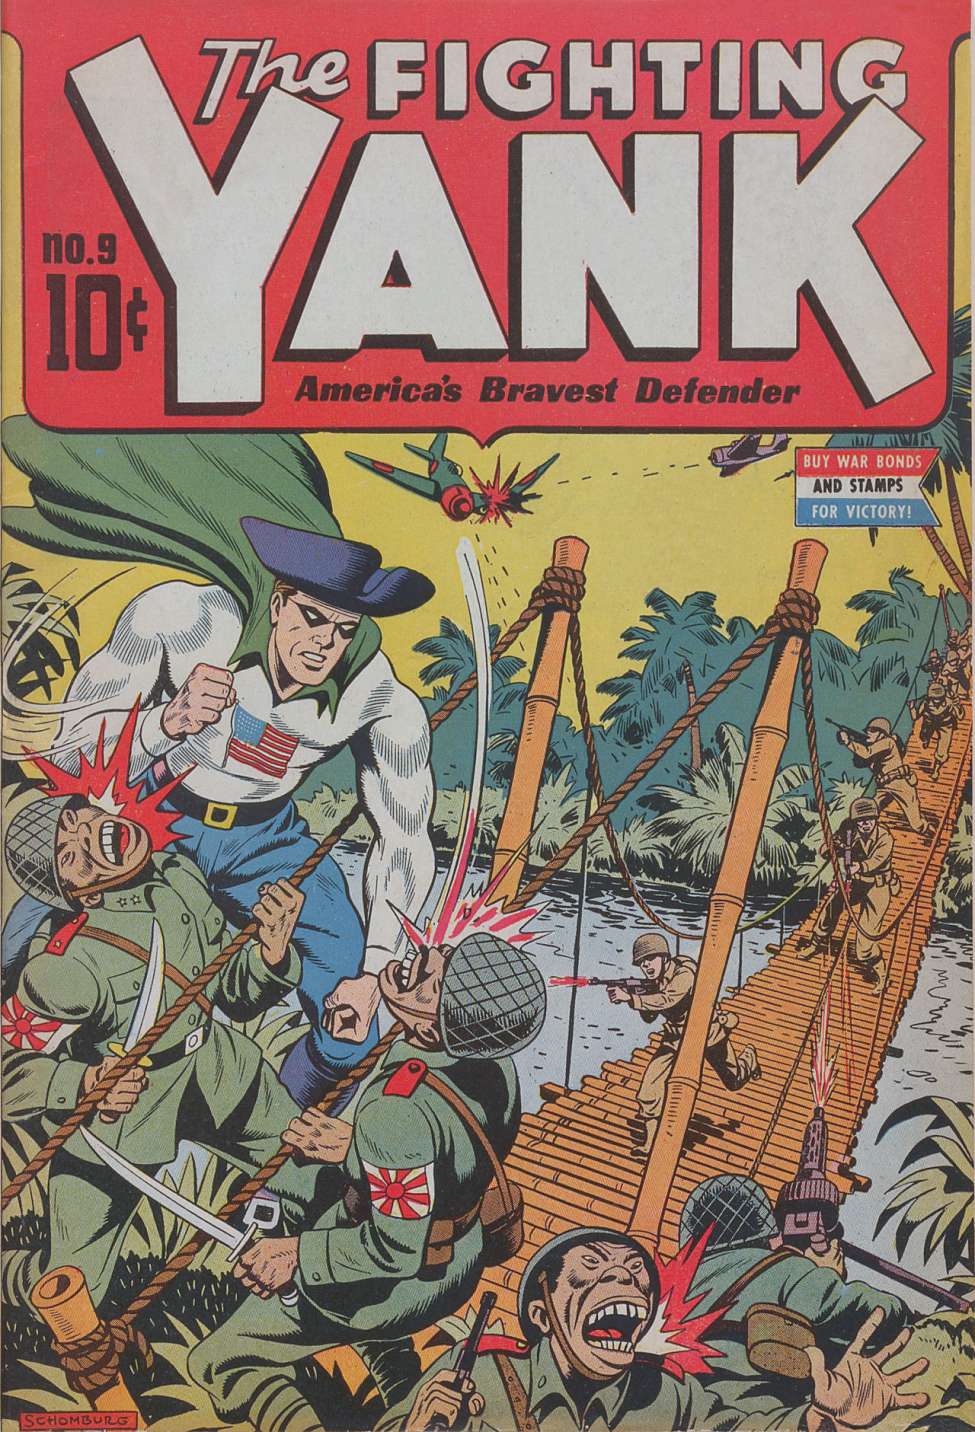 Comic Book Cover For The Fighting Yank 9 - Version 2